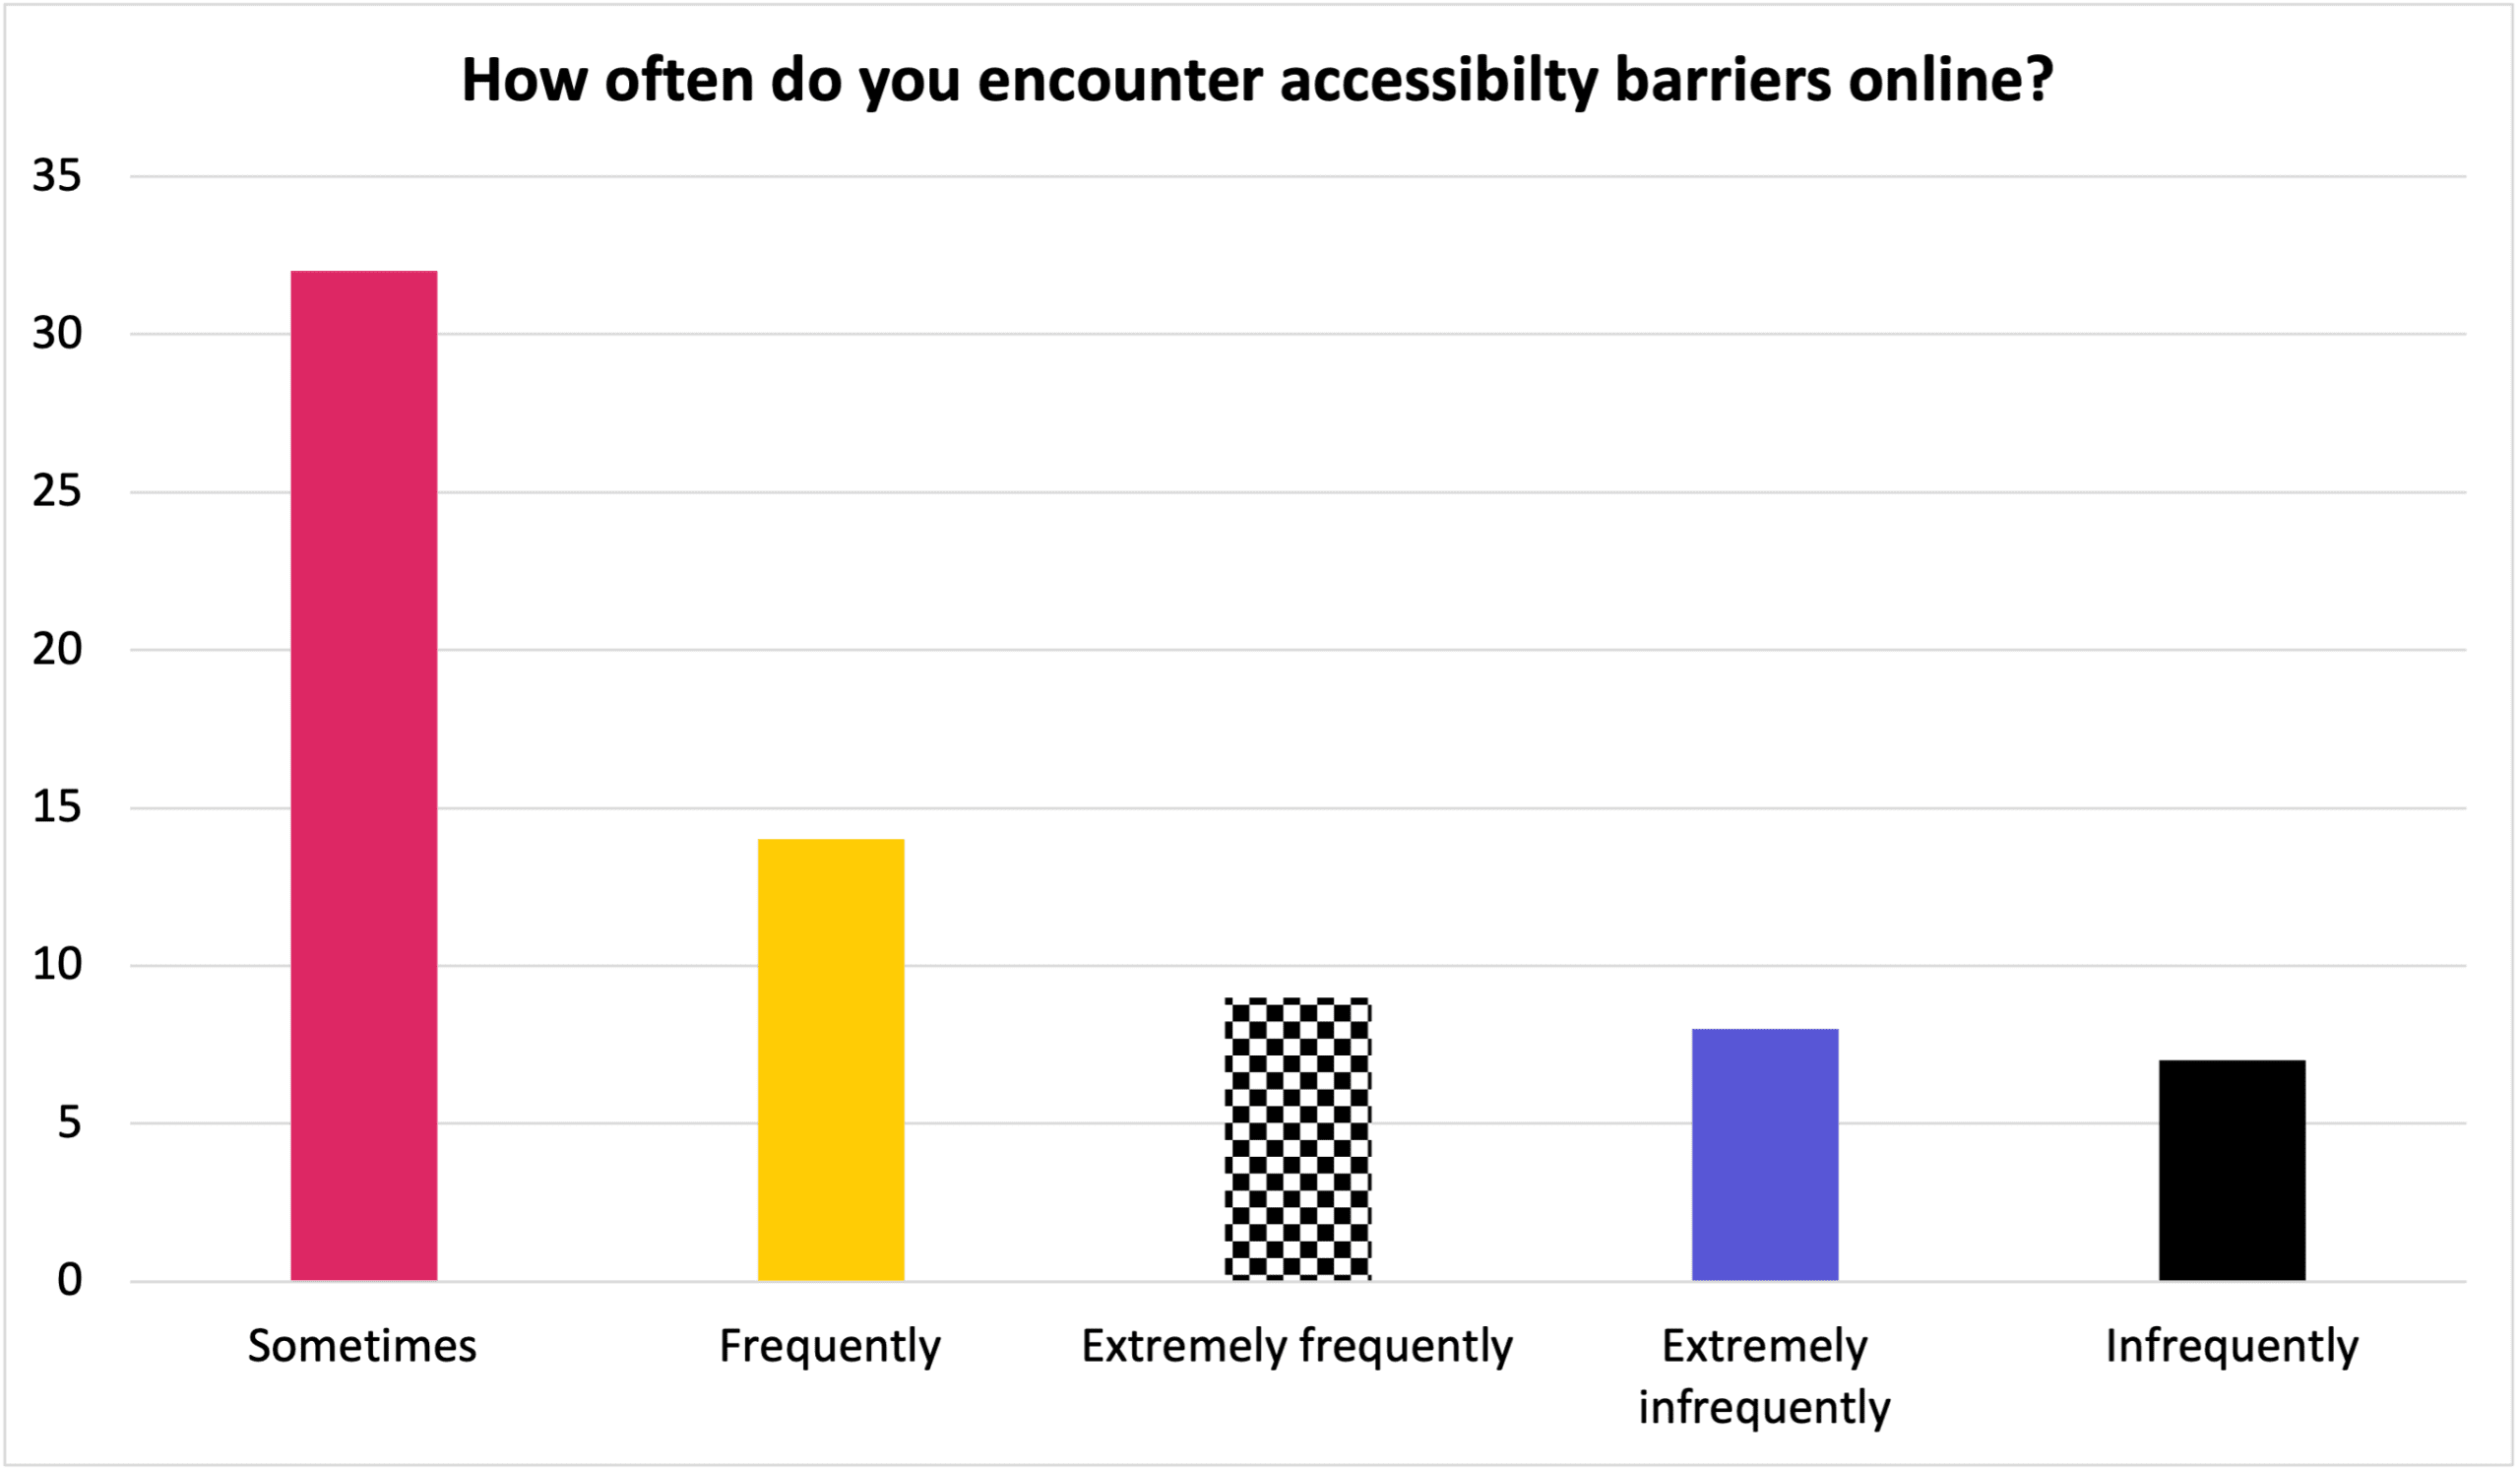 Bar graph: How often do you encounter accessibility barriers online? Each bar represents frequency, with the majority of respondents answering "sometimes", followed by "frequently" as the most common.